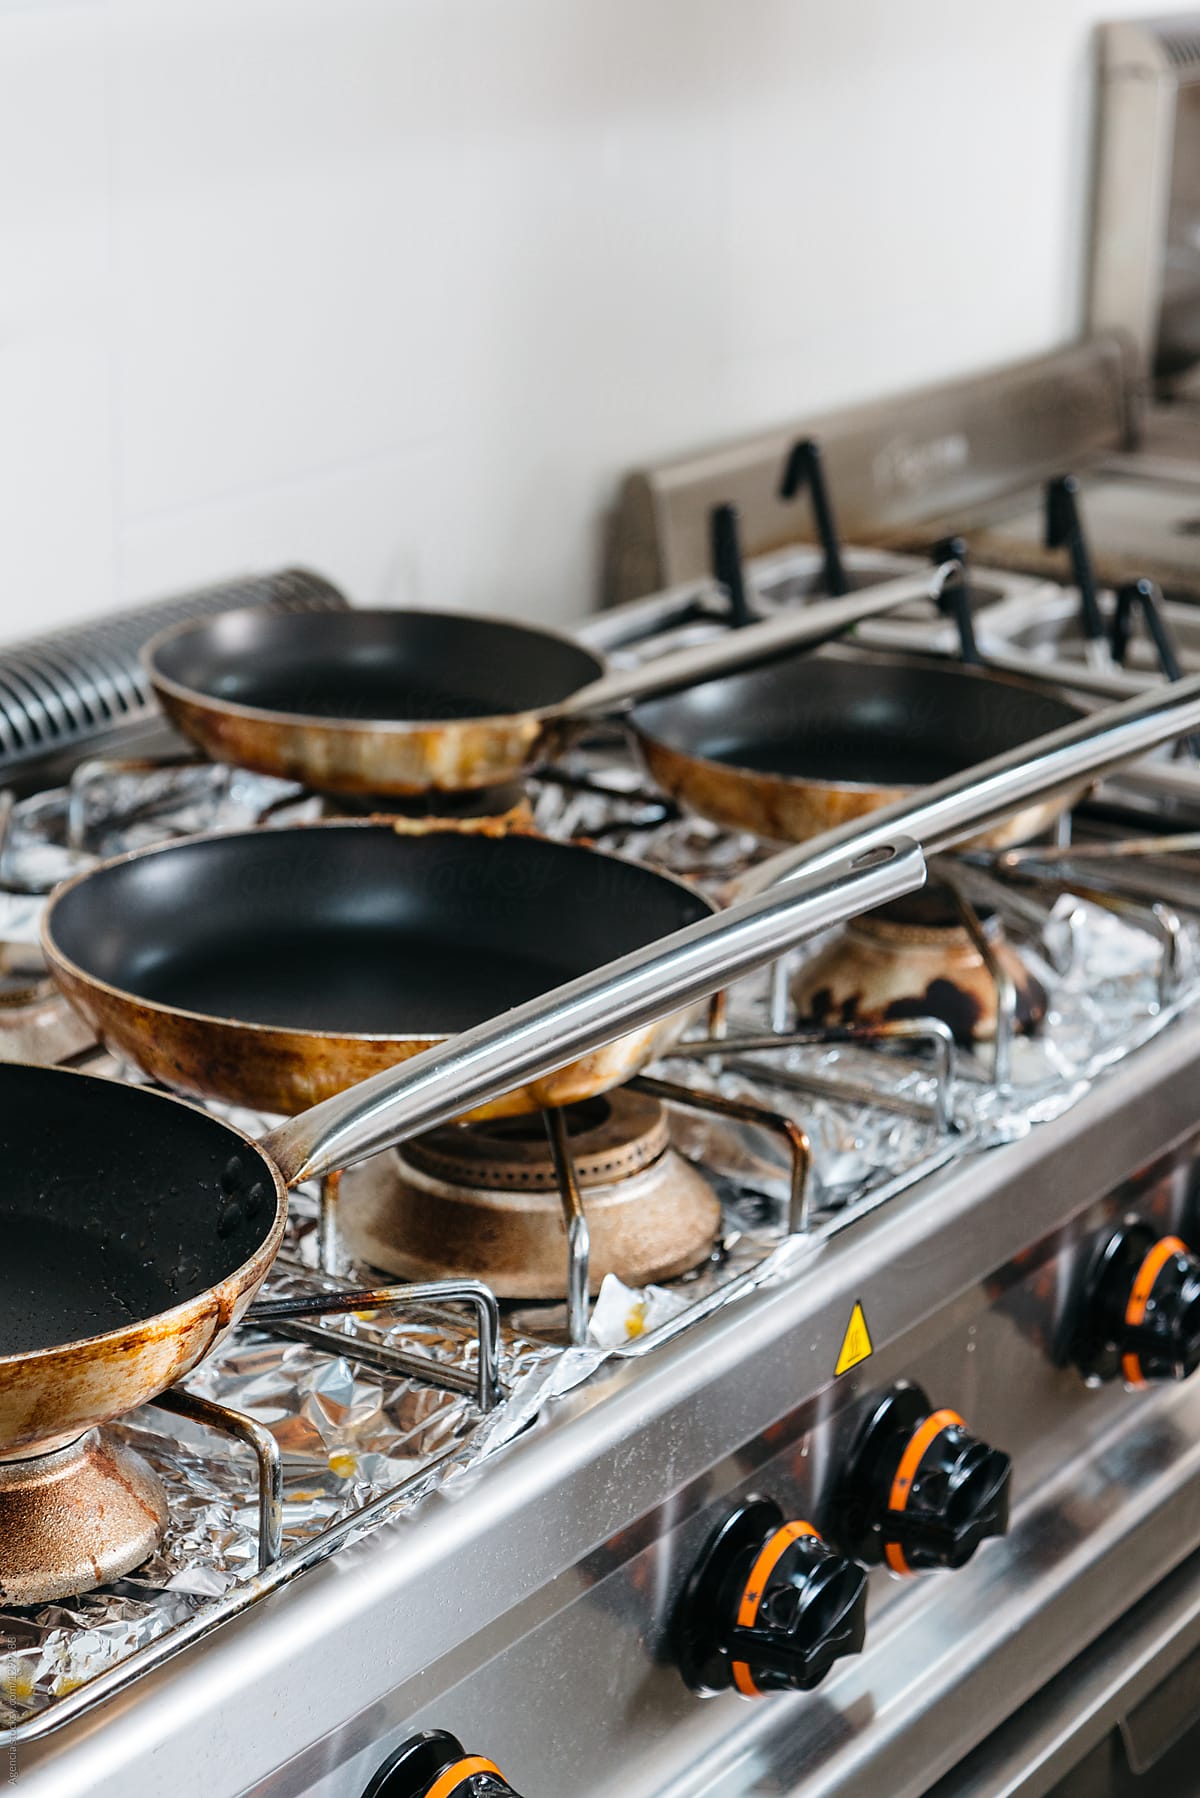 Pans In A Professional Kitchen by Stocksy Contributor Agencia - Stocksy